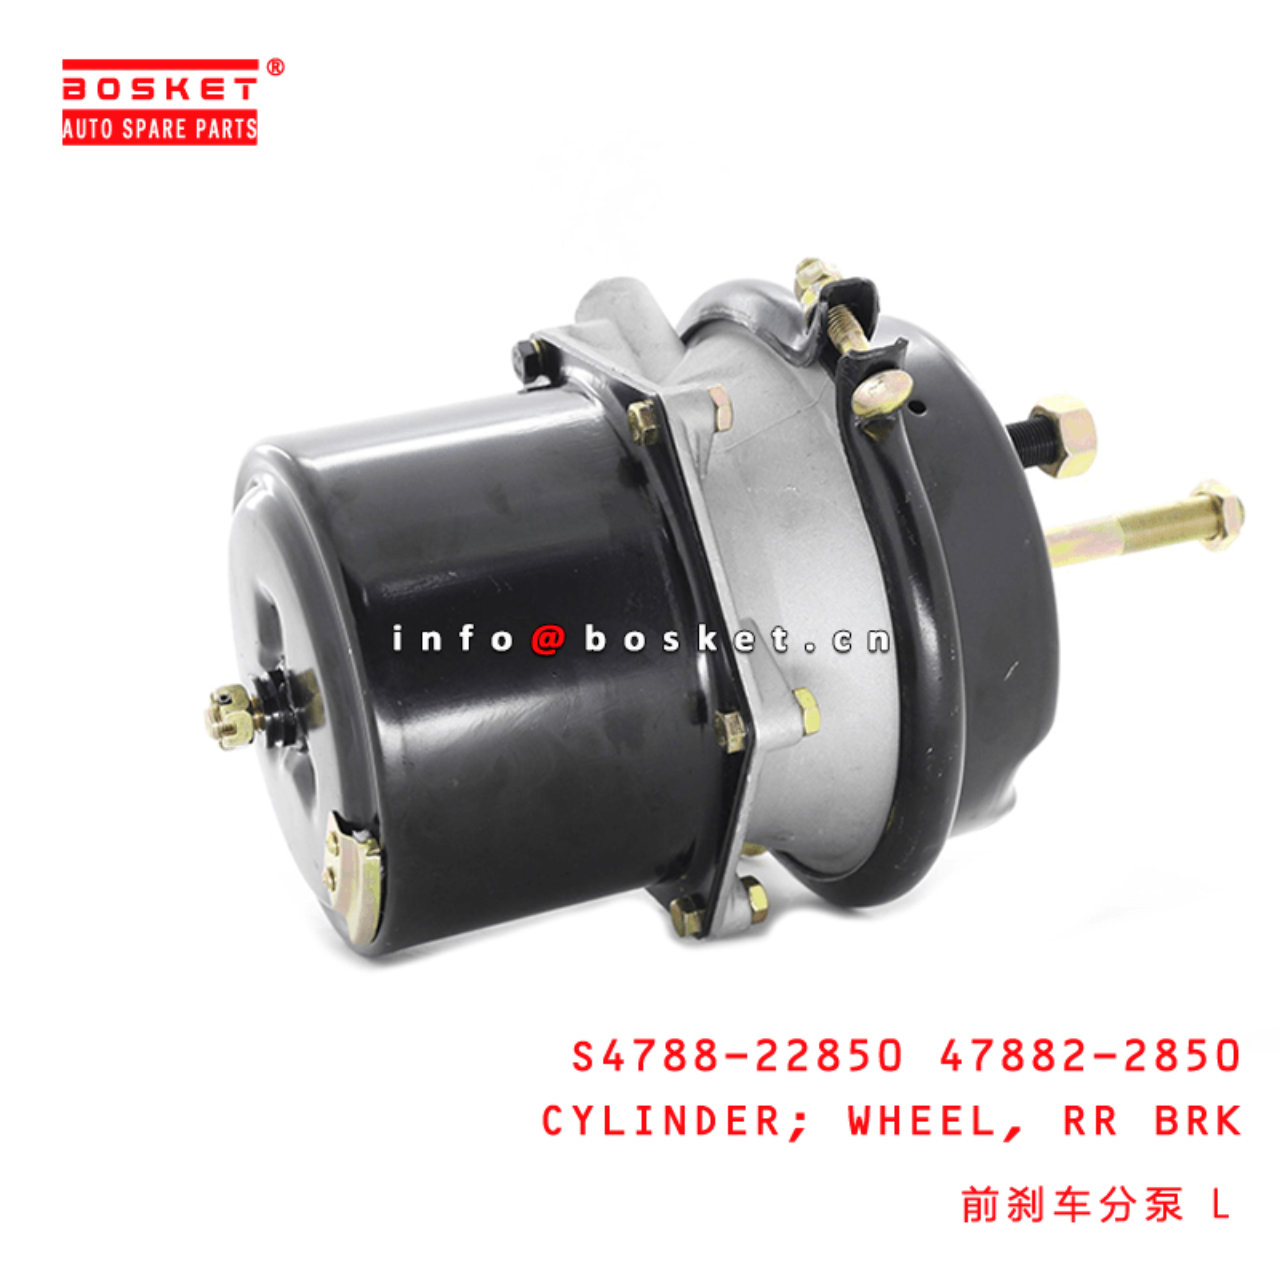 S4788-22850 47882-2850 Rear Brake Wheel Cylinder Suitable For HINO E13C 